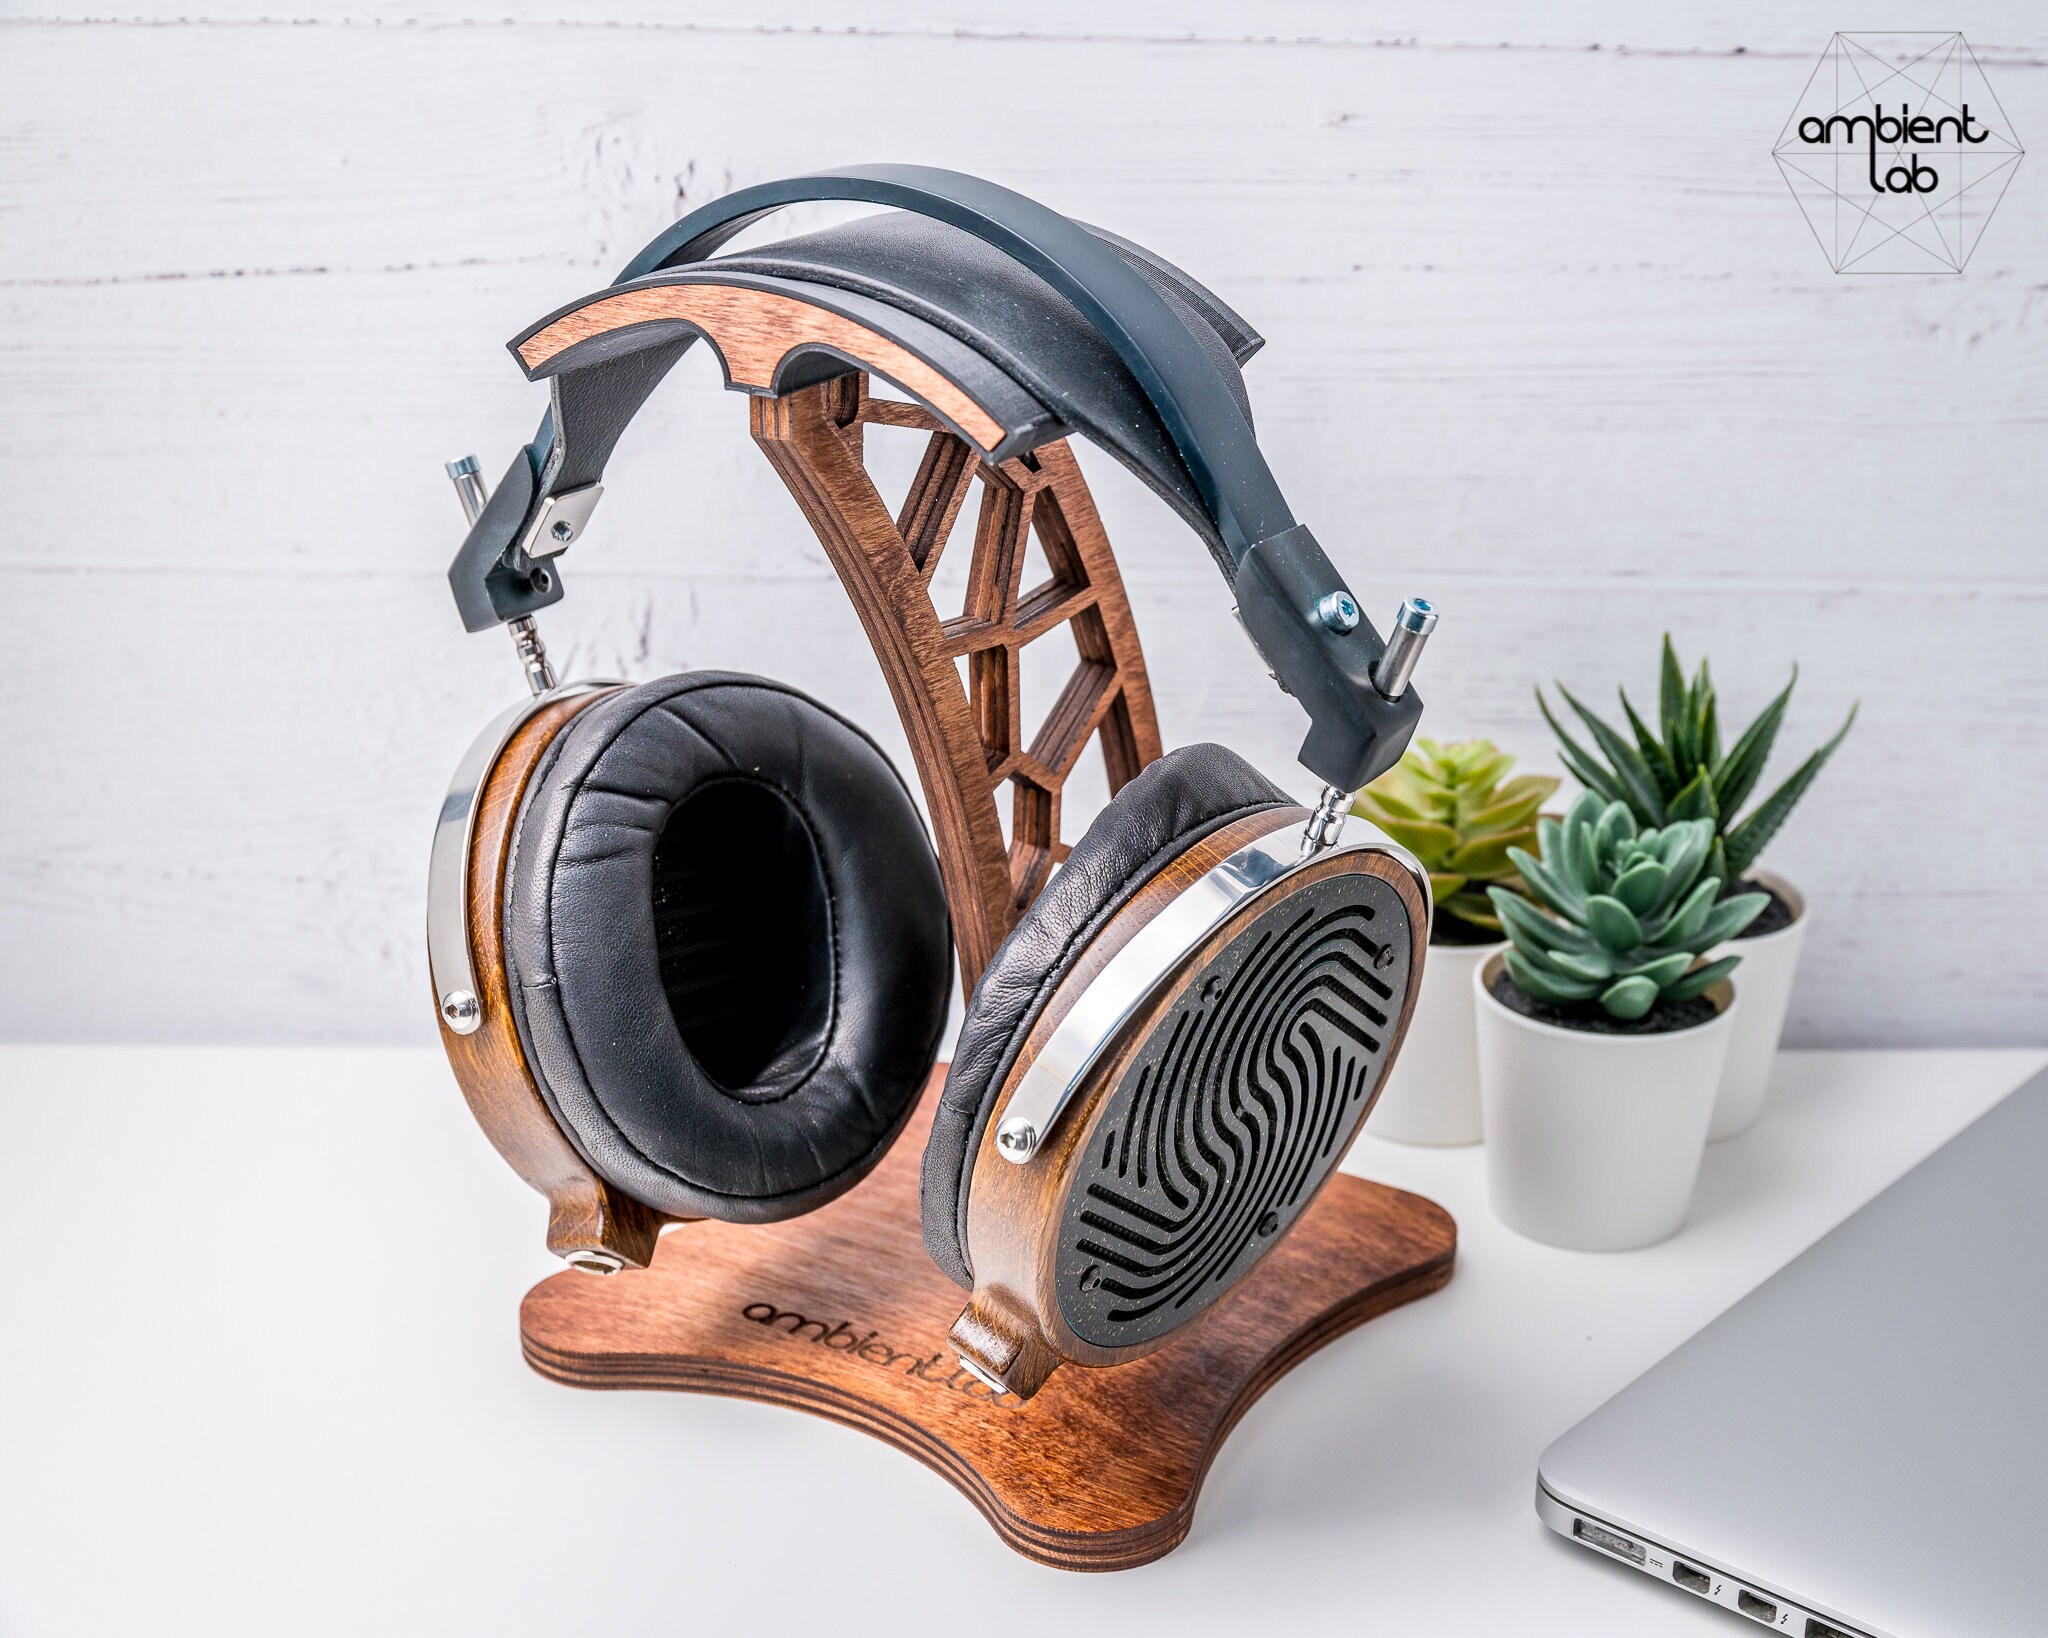 Headphone Stand, headset stand, wooden headphone holder, gift for him,  gamer - Shop Oakywood Headphones & Earbuds - Pinkoi